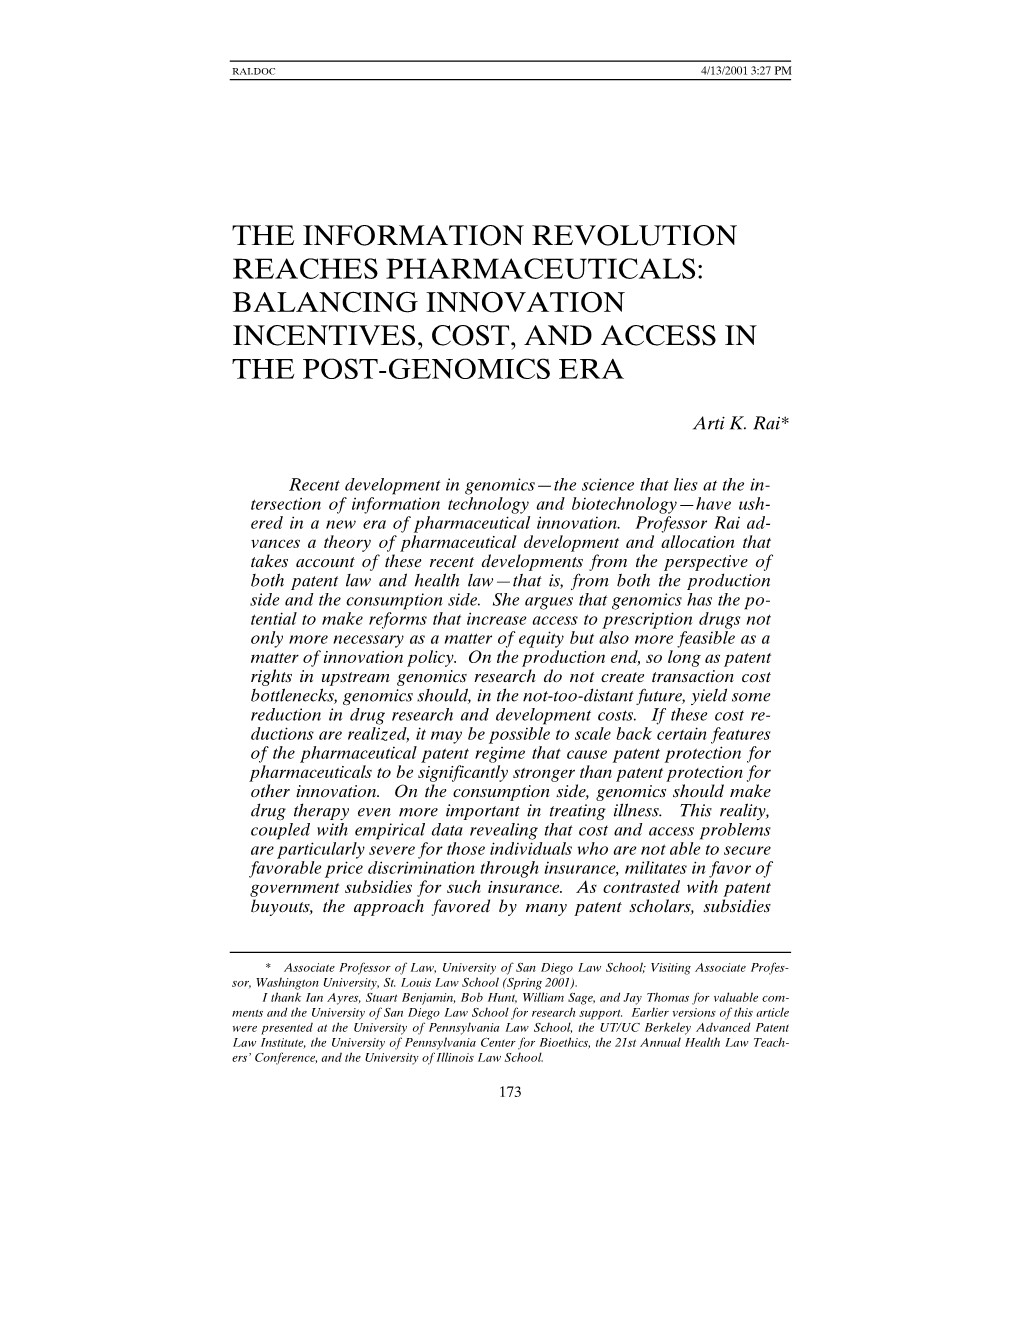 The Information Revolution Reaches Pharmaceuticals: Balancing Innovation Incentives, Cost, and Access in the Post-Genomics Era